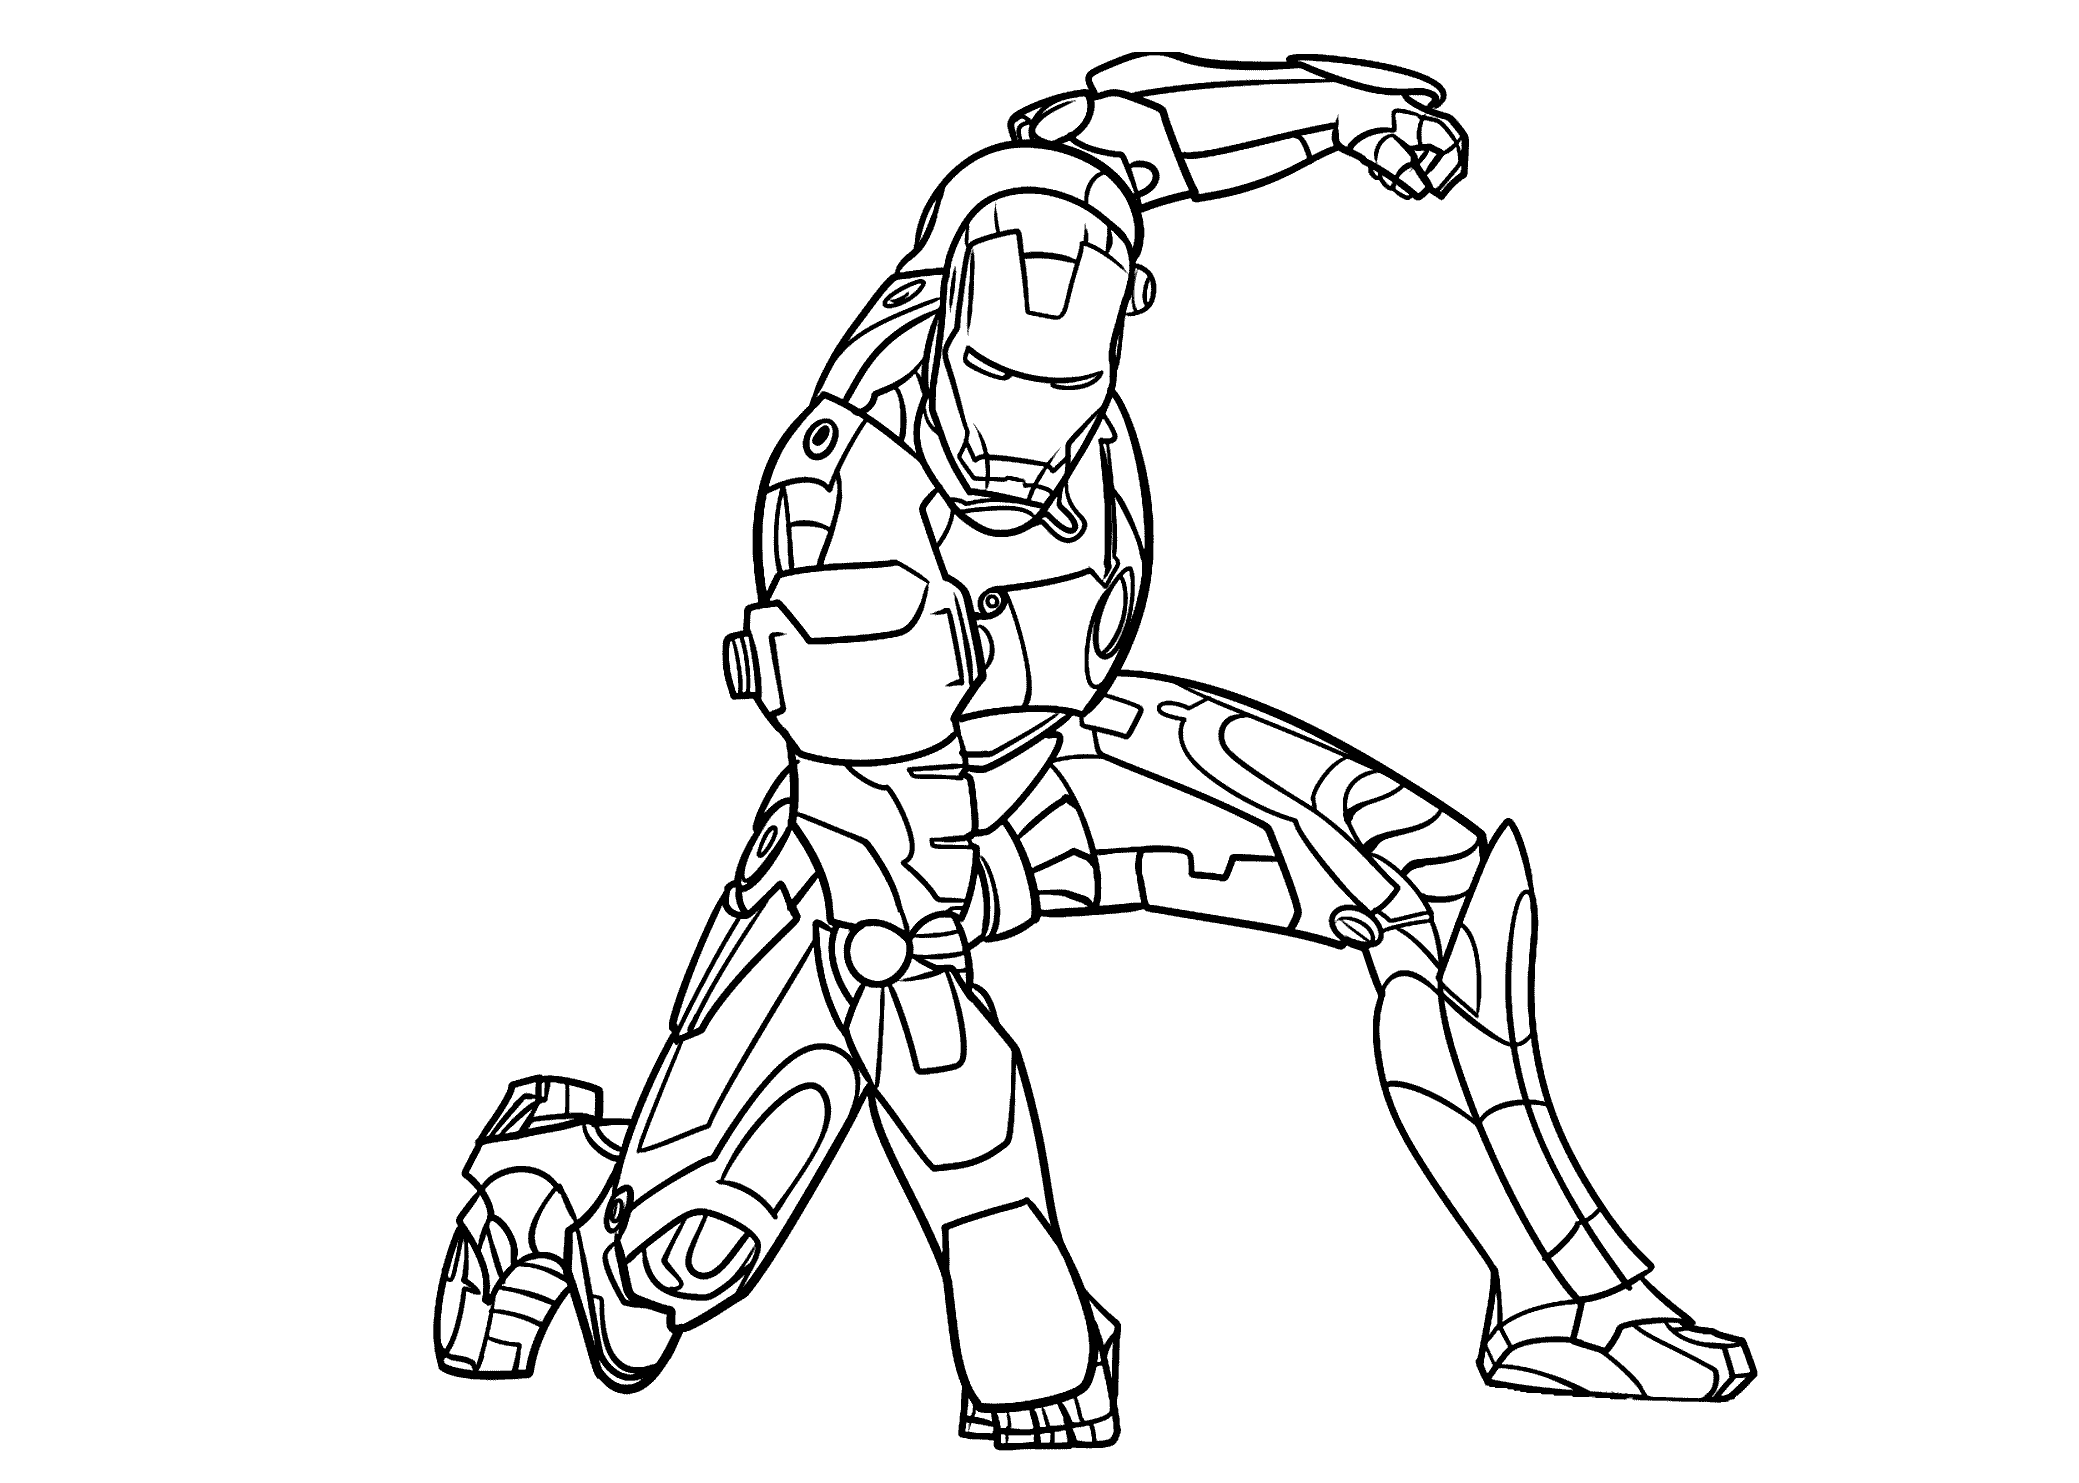 Iron Man Printable Coloring Pages   High Quality Coloring Pages ...